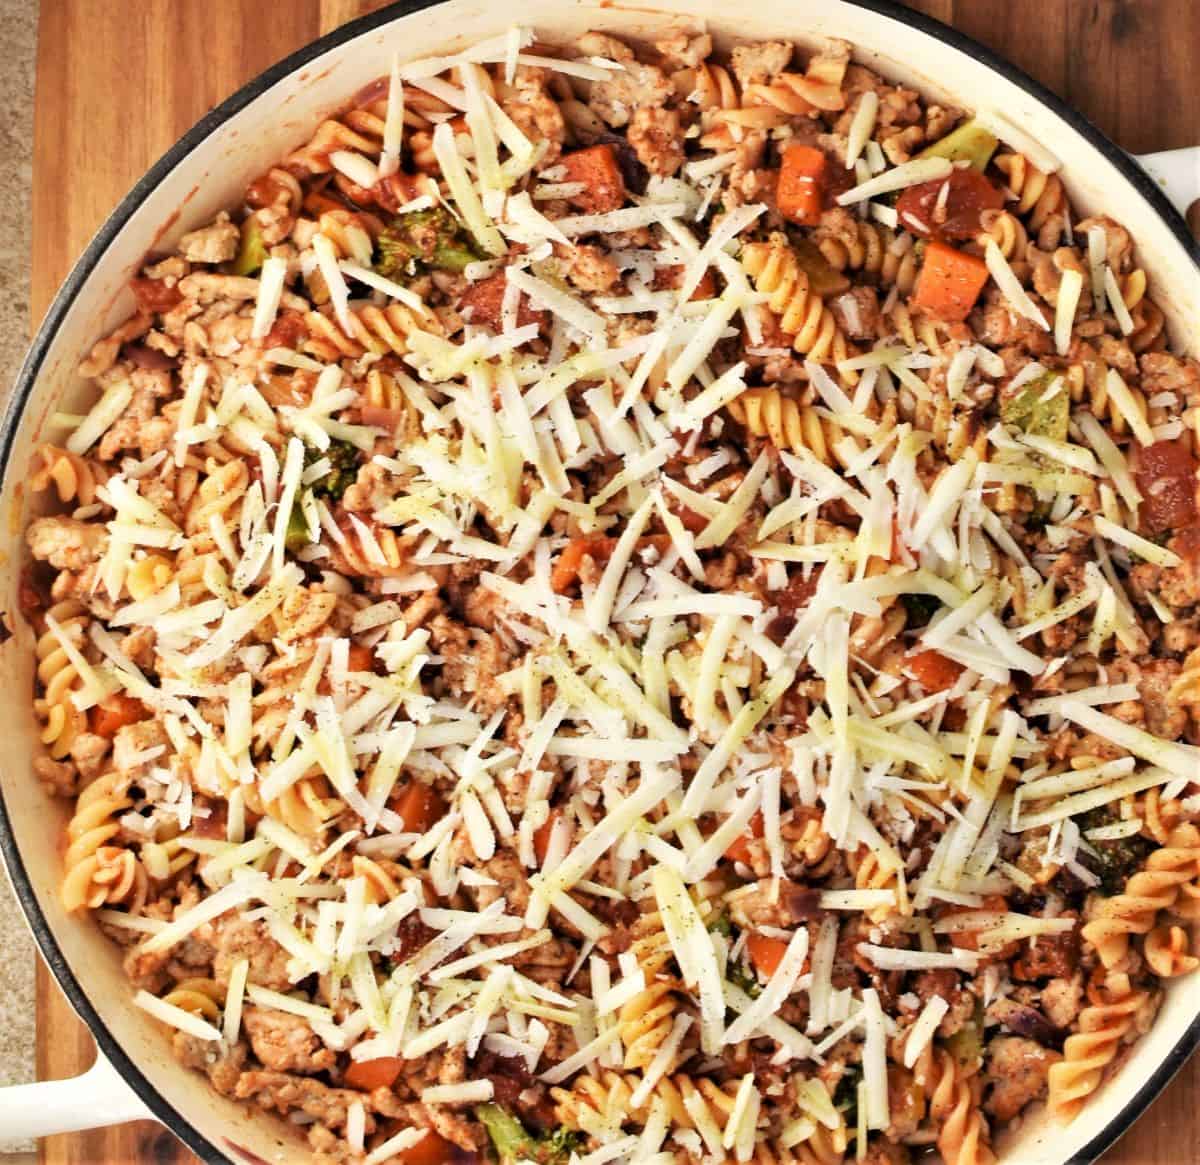 Chicken casserole with grated cheese on top in large round dish.